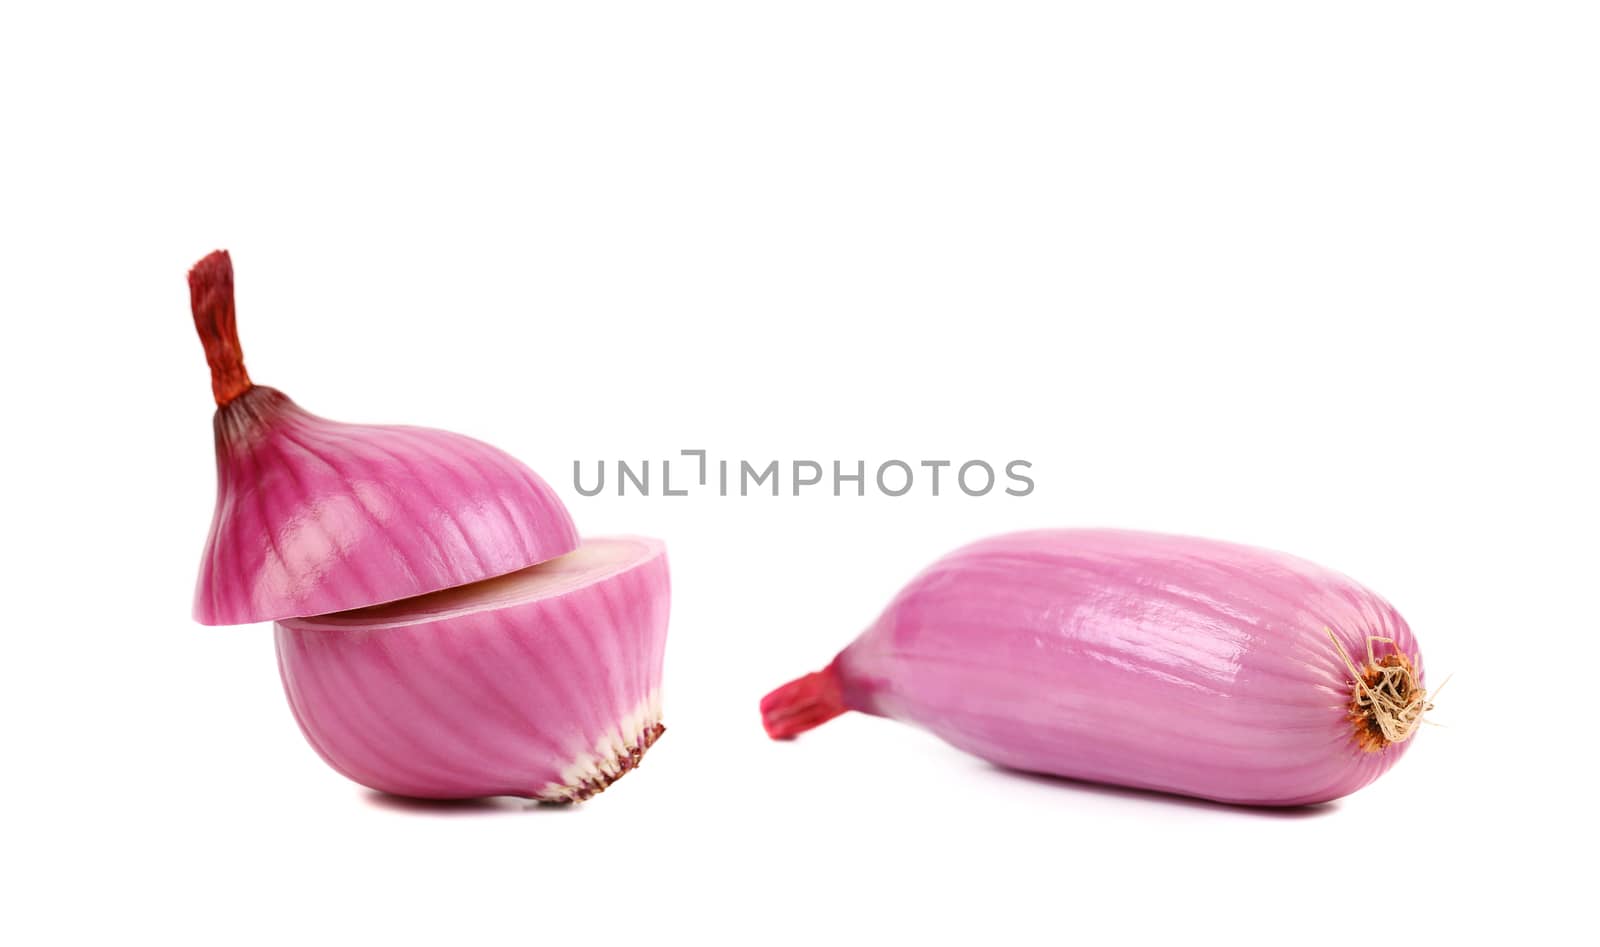 Two chopped and whole violet onion. by indigolotos